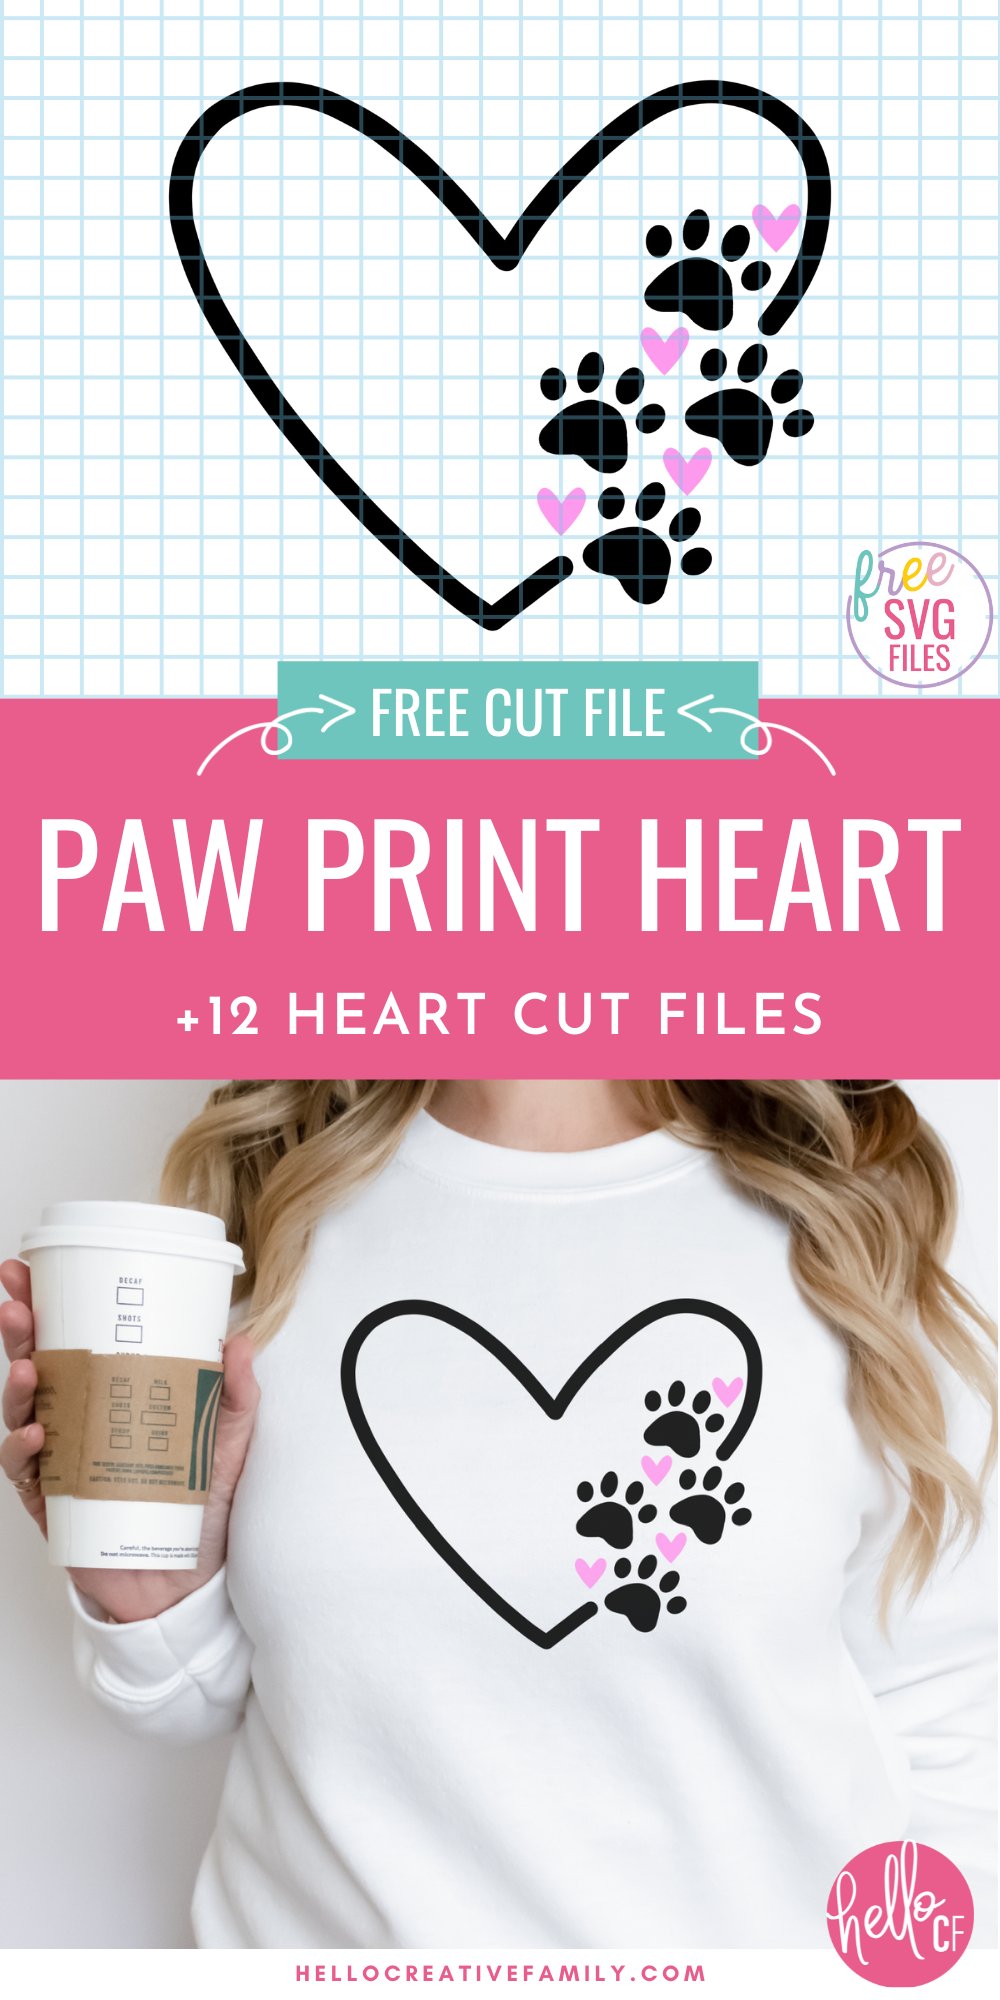 If you love "love" then this cut file collection is for you! We're sharing 12 free heart cut files along with the key to my own heart-- a heart paw print SVG that is so much fun for cat and dog lovers! Use these beautiful cut files to make handmade crafts using your Cricut or Silhouette cutting machines. These free heart svg files are perfect for Valentine's Day Crafting, wedding crafts, anniversaries and more! Make mugs, shirts, throw pillows, tote bags, hoodies and more!